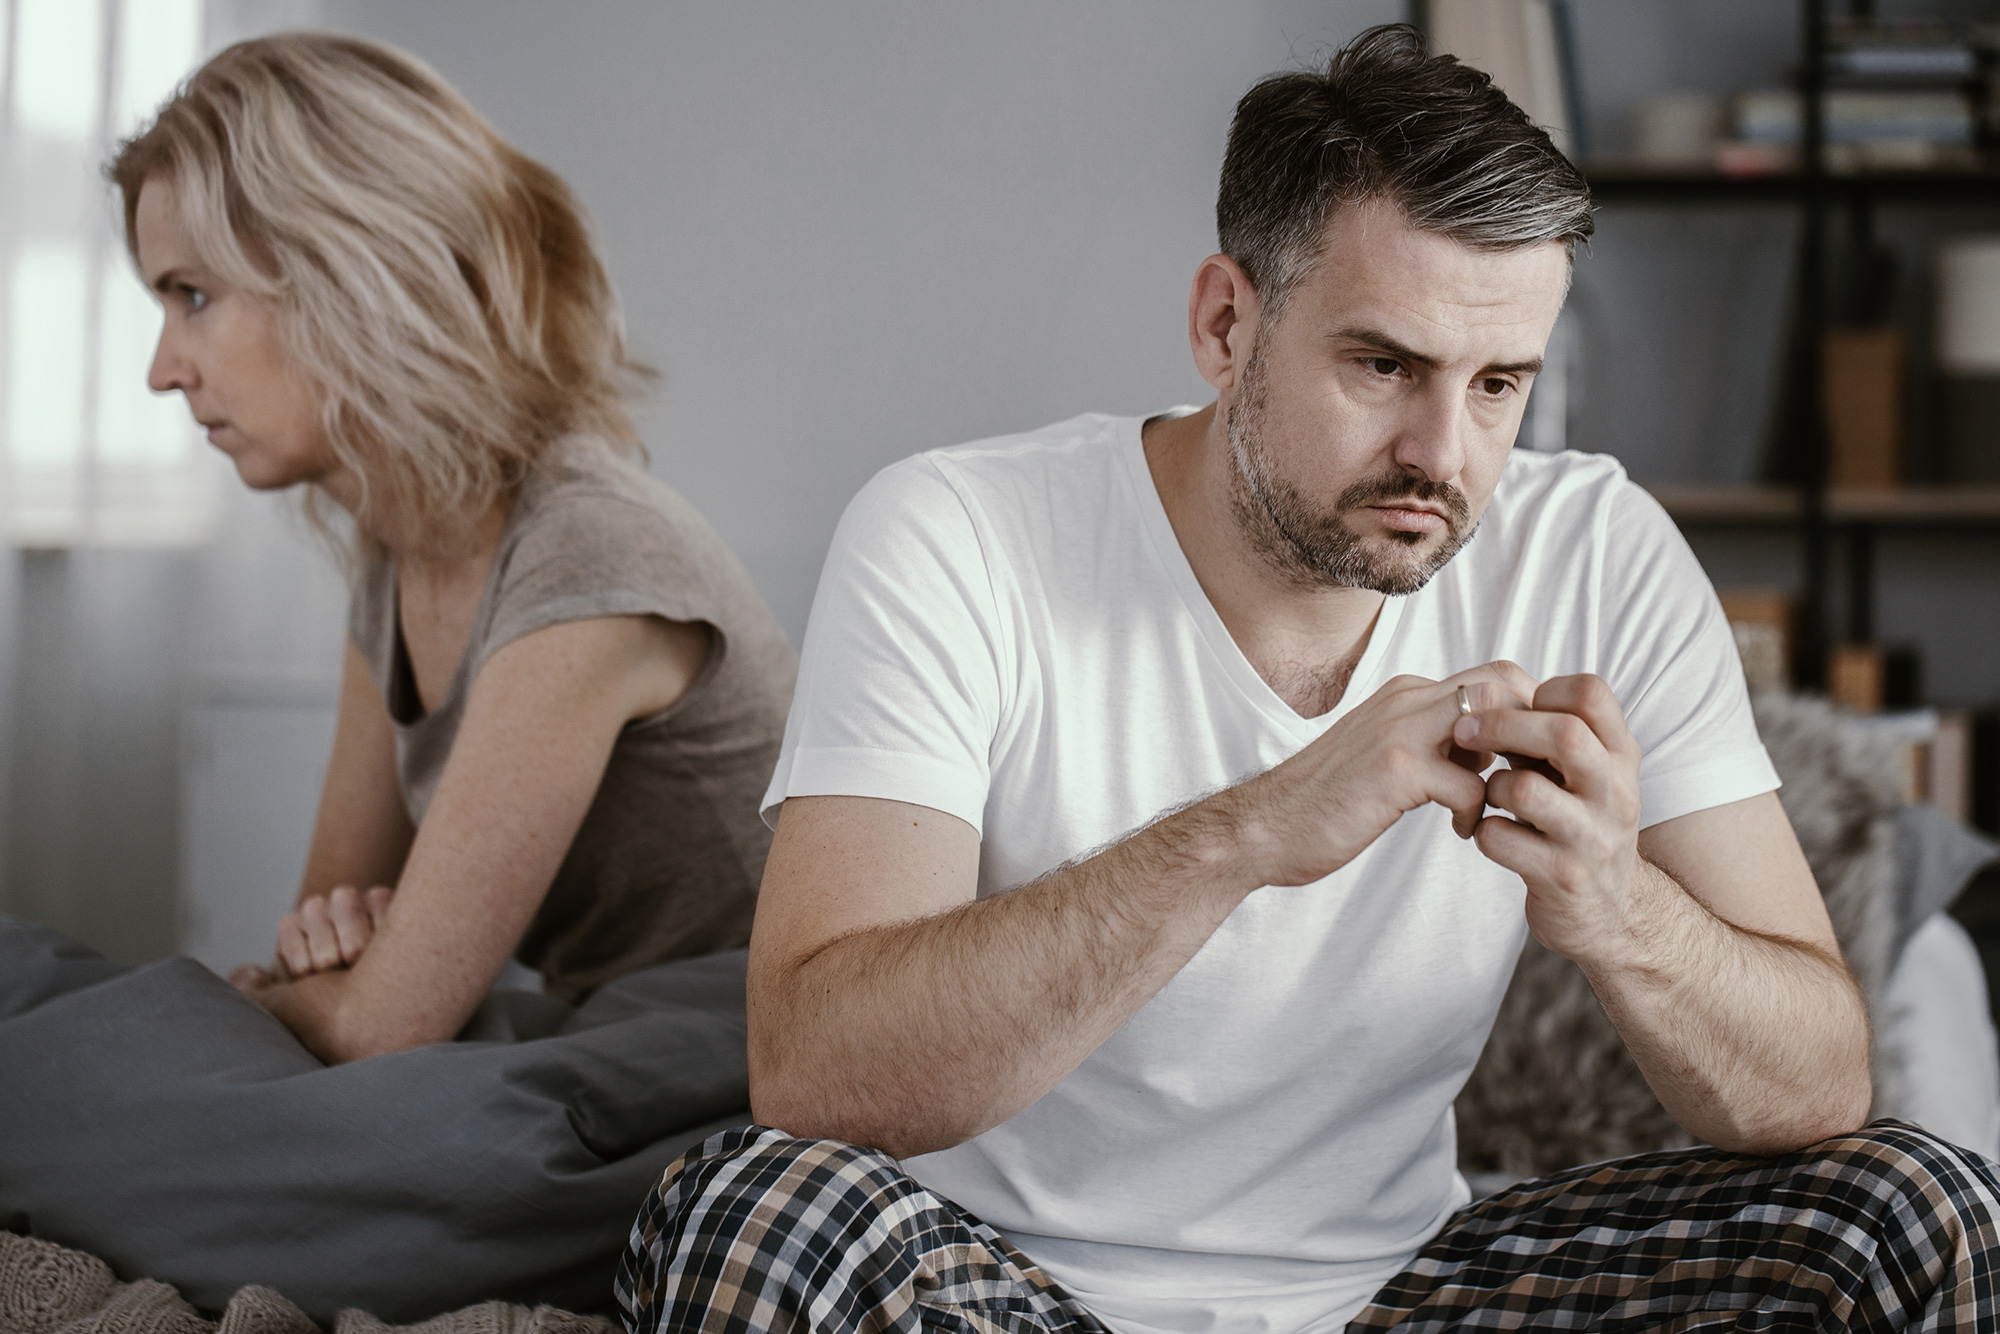 Can You Learn Your Way Out of a Bad Marriage?